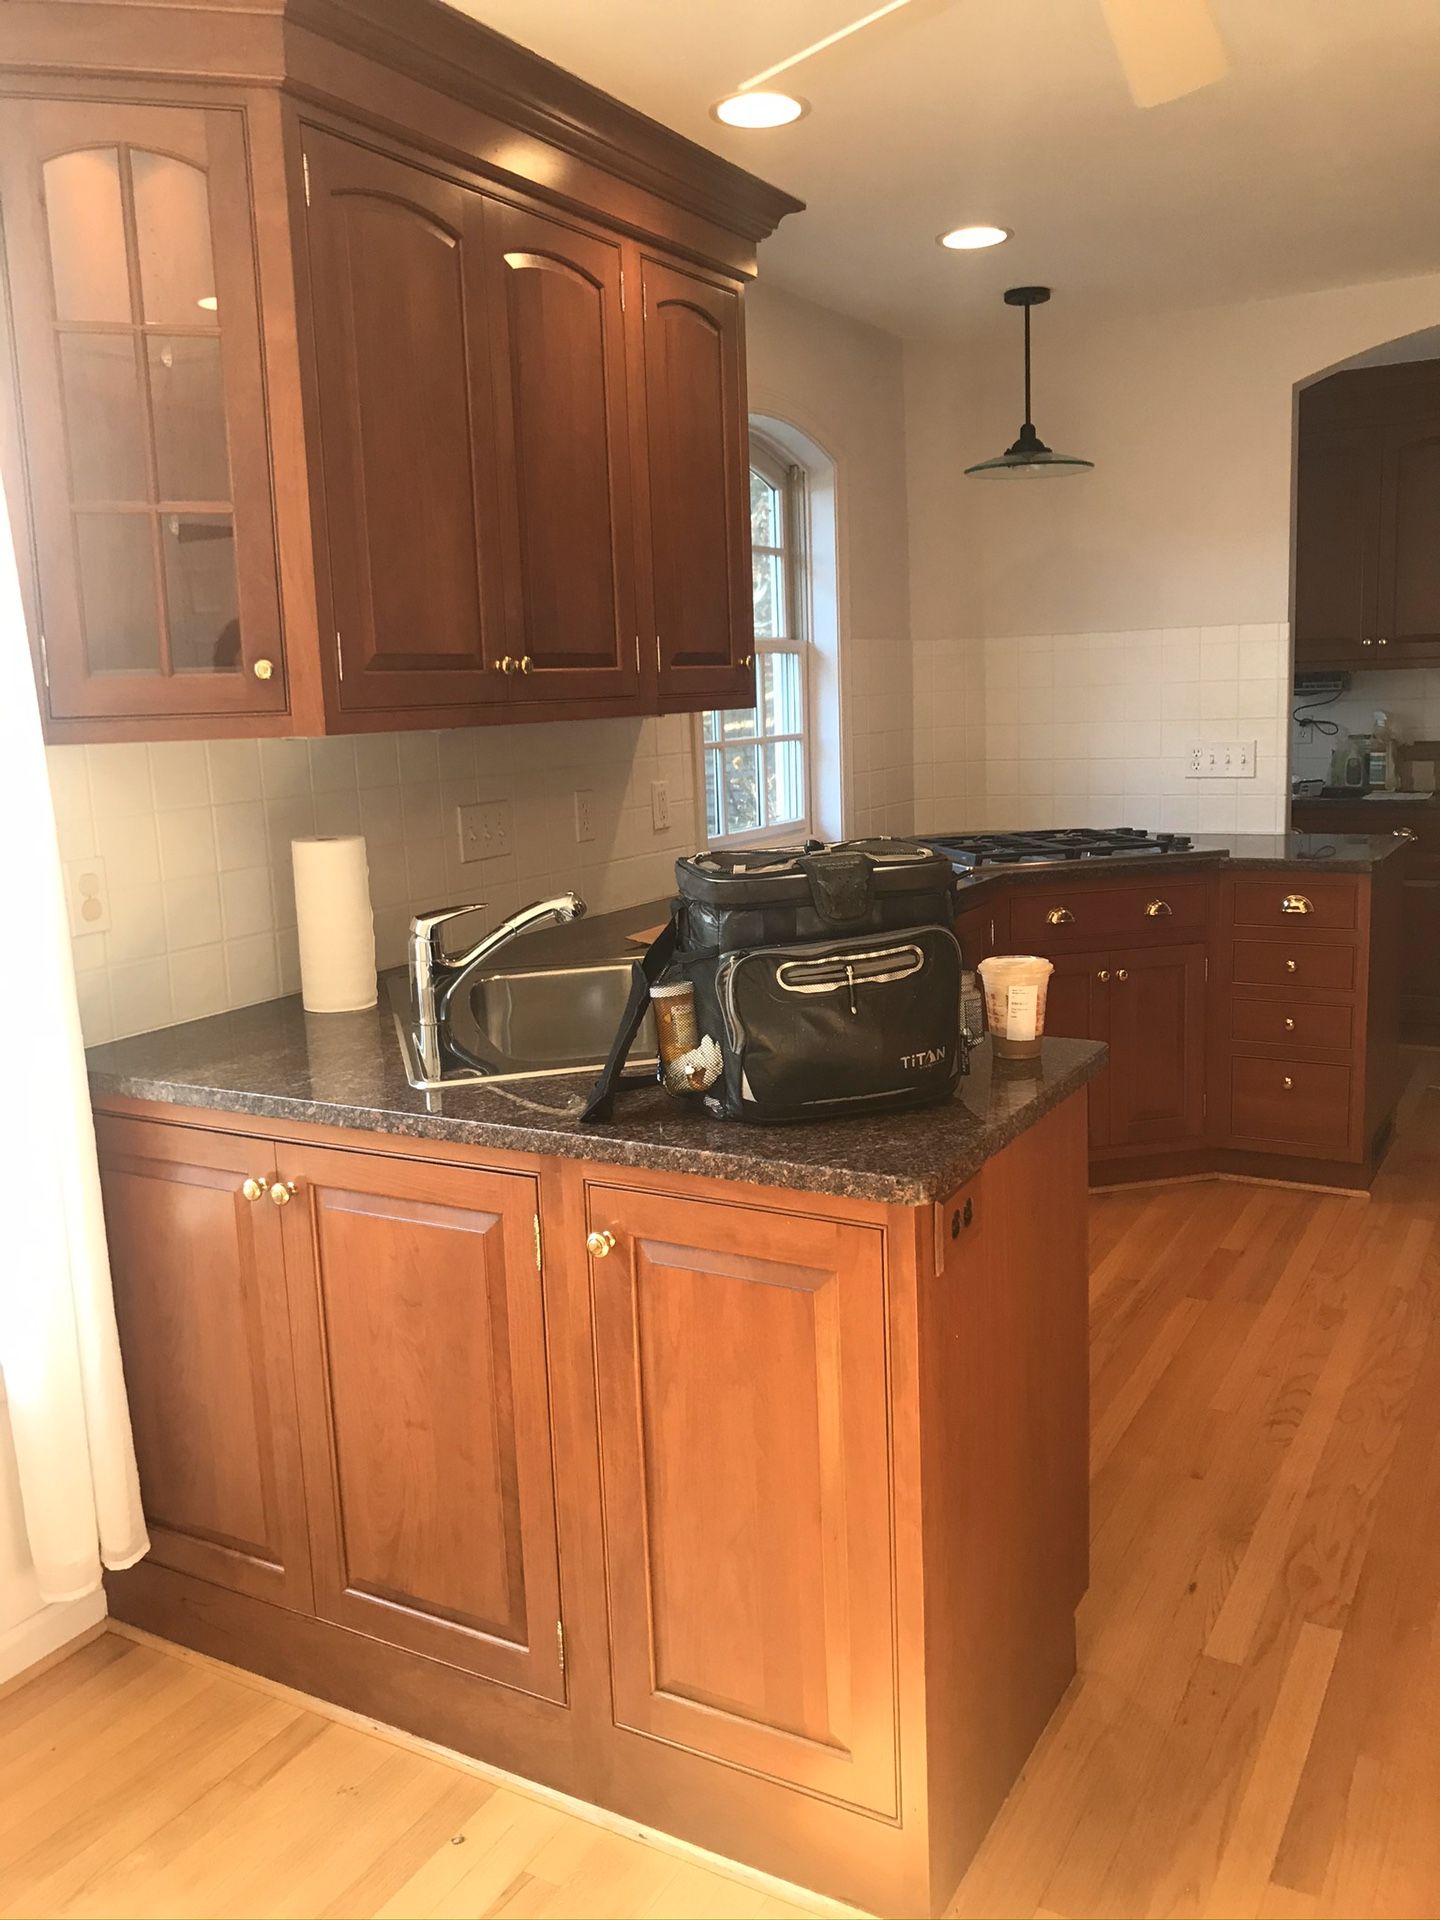 Inset wood cabinets with brass hardware- cute kitchen for sale, good quality